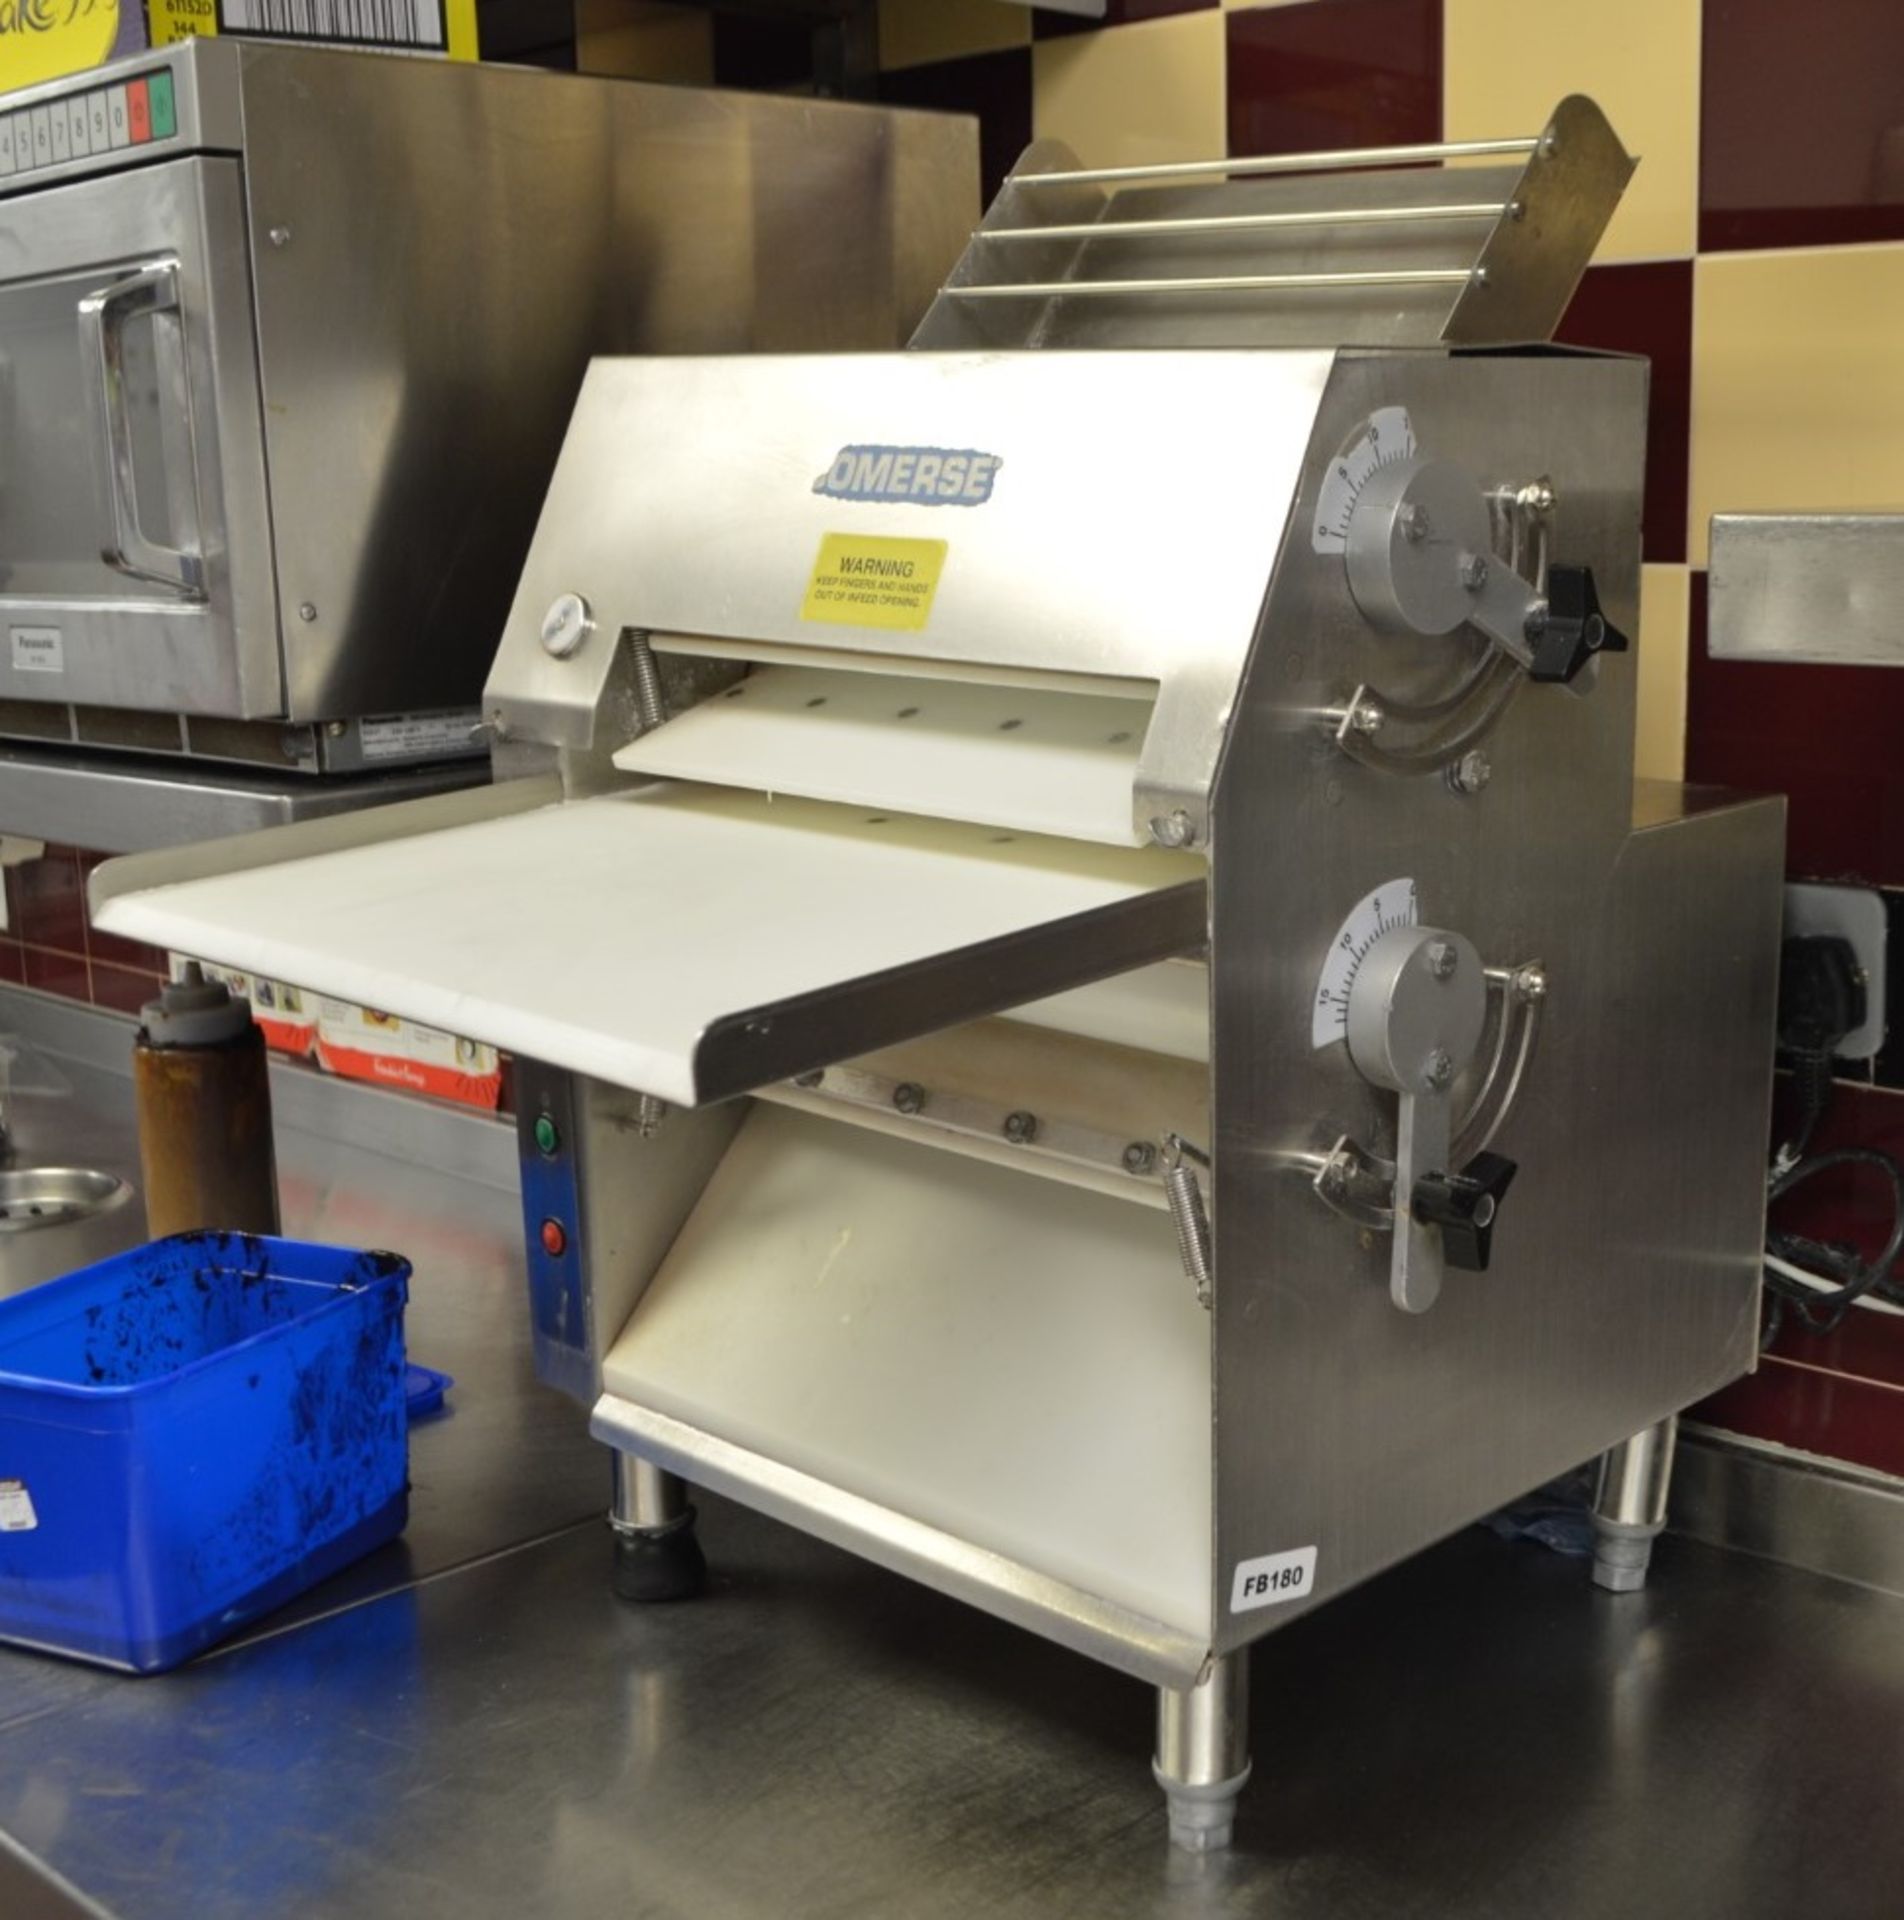 1 x Somerset Dough Roller - Model CDR1550 - Suitable For Pizza, Naans, Chatati Wraps etc - Ref FB180 - Image 5 of 6